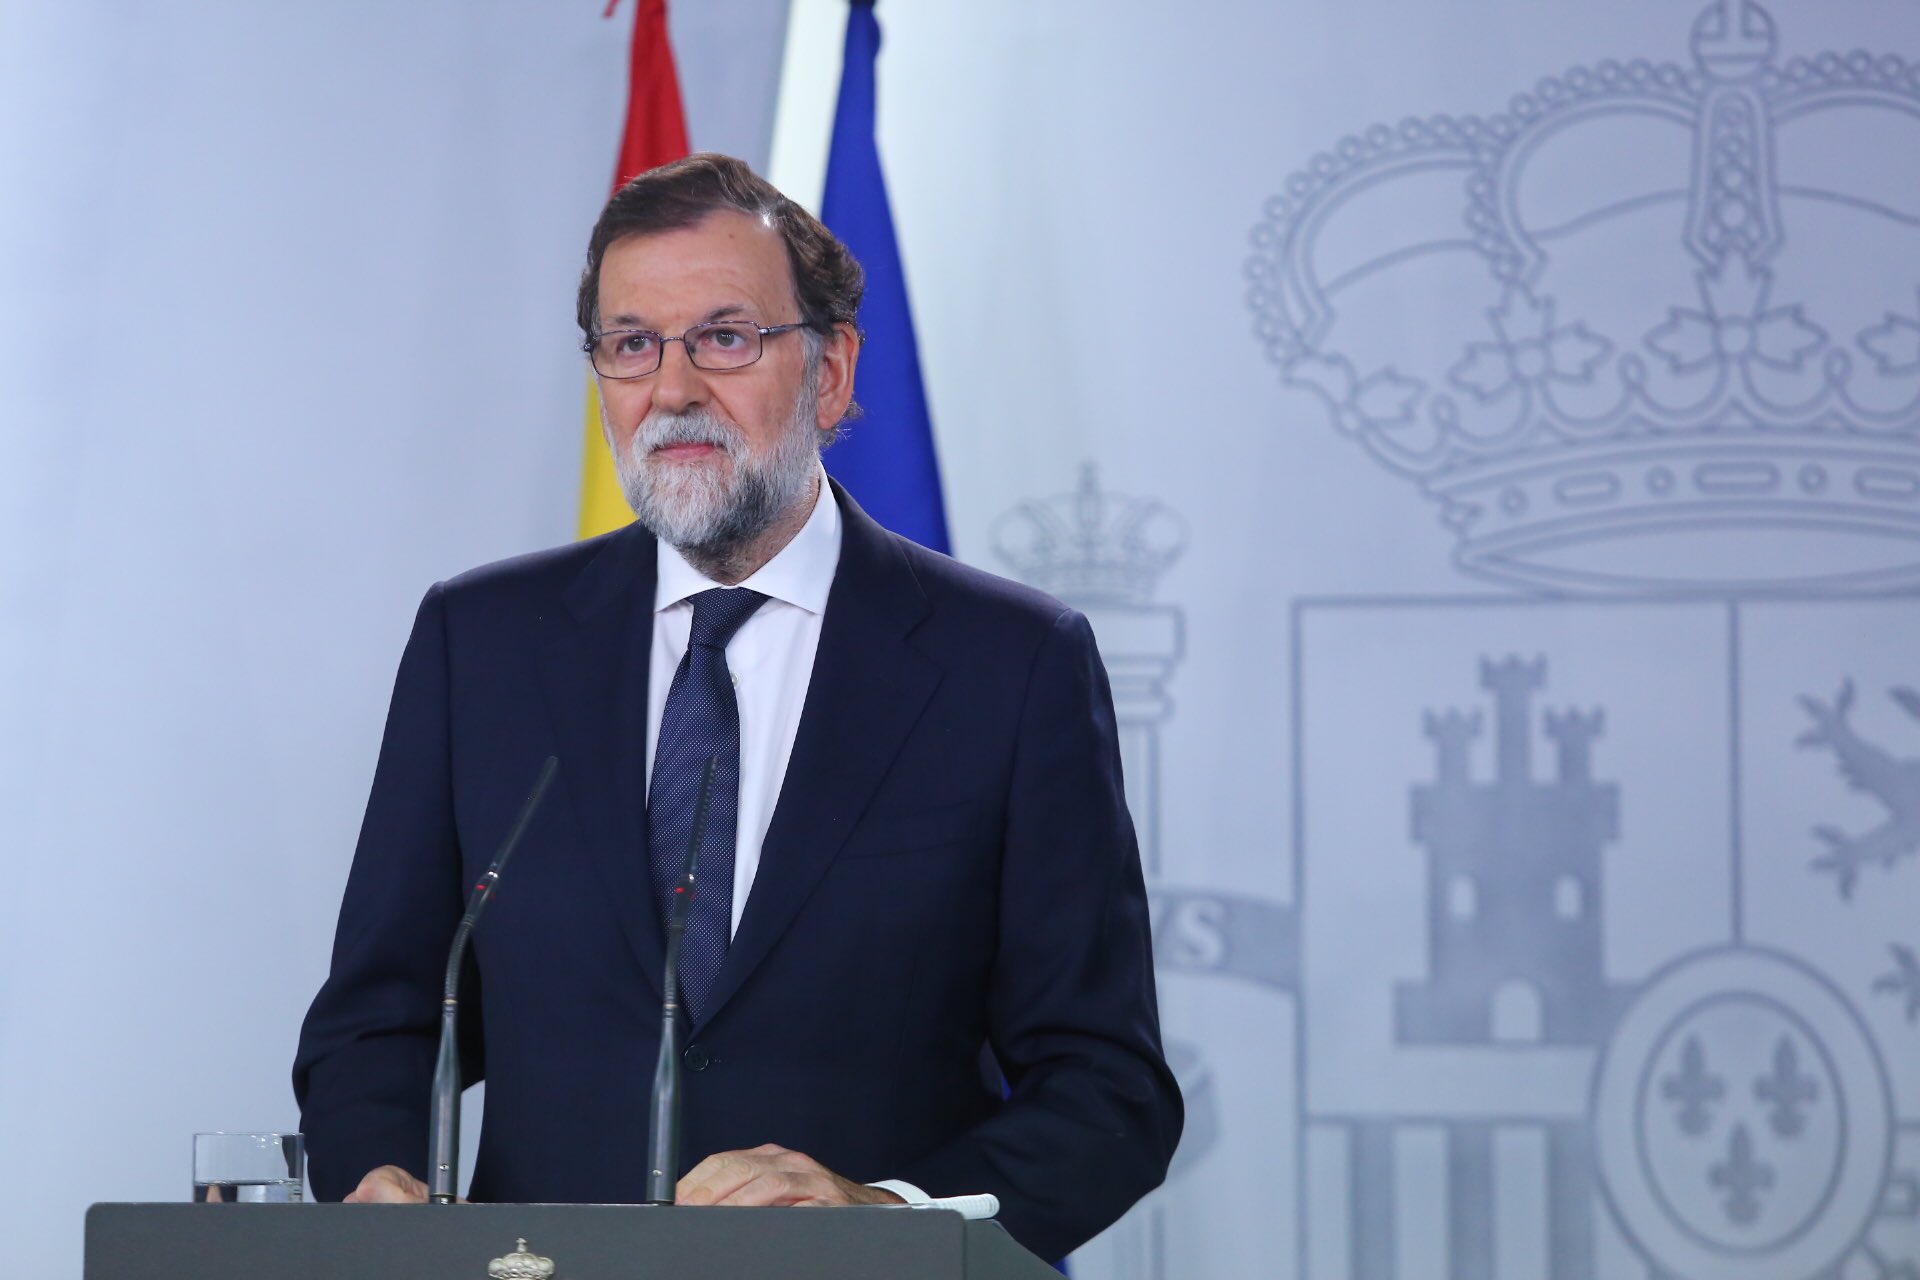 Spanish PM Rajoy: "Give up, you're in time to avoid greater evils"